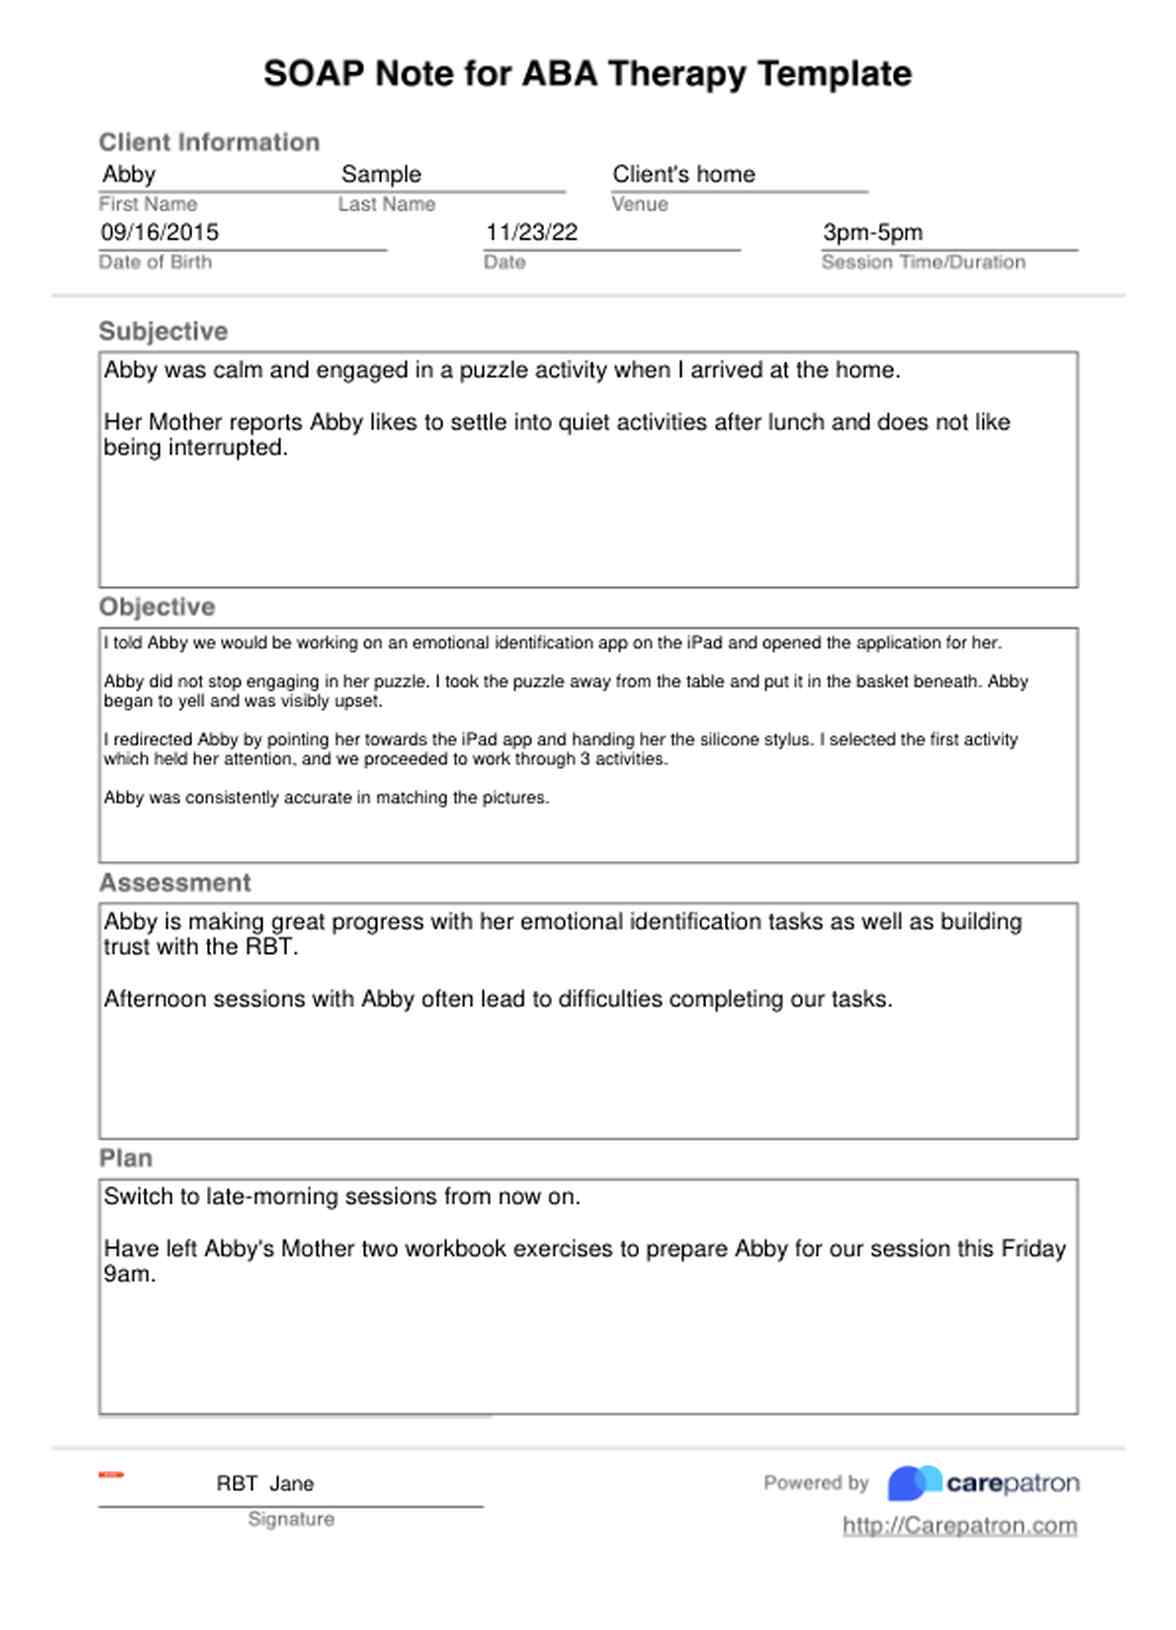 SOAP Notes for ABA Therapy Template PDF Example